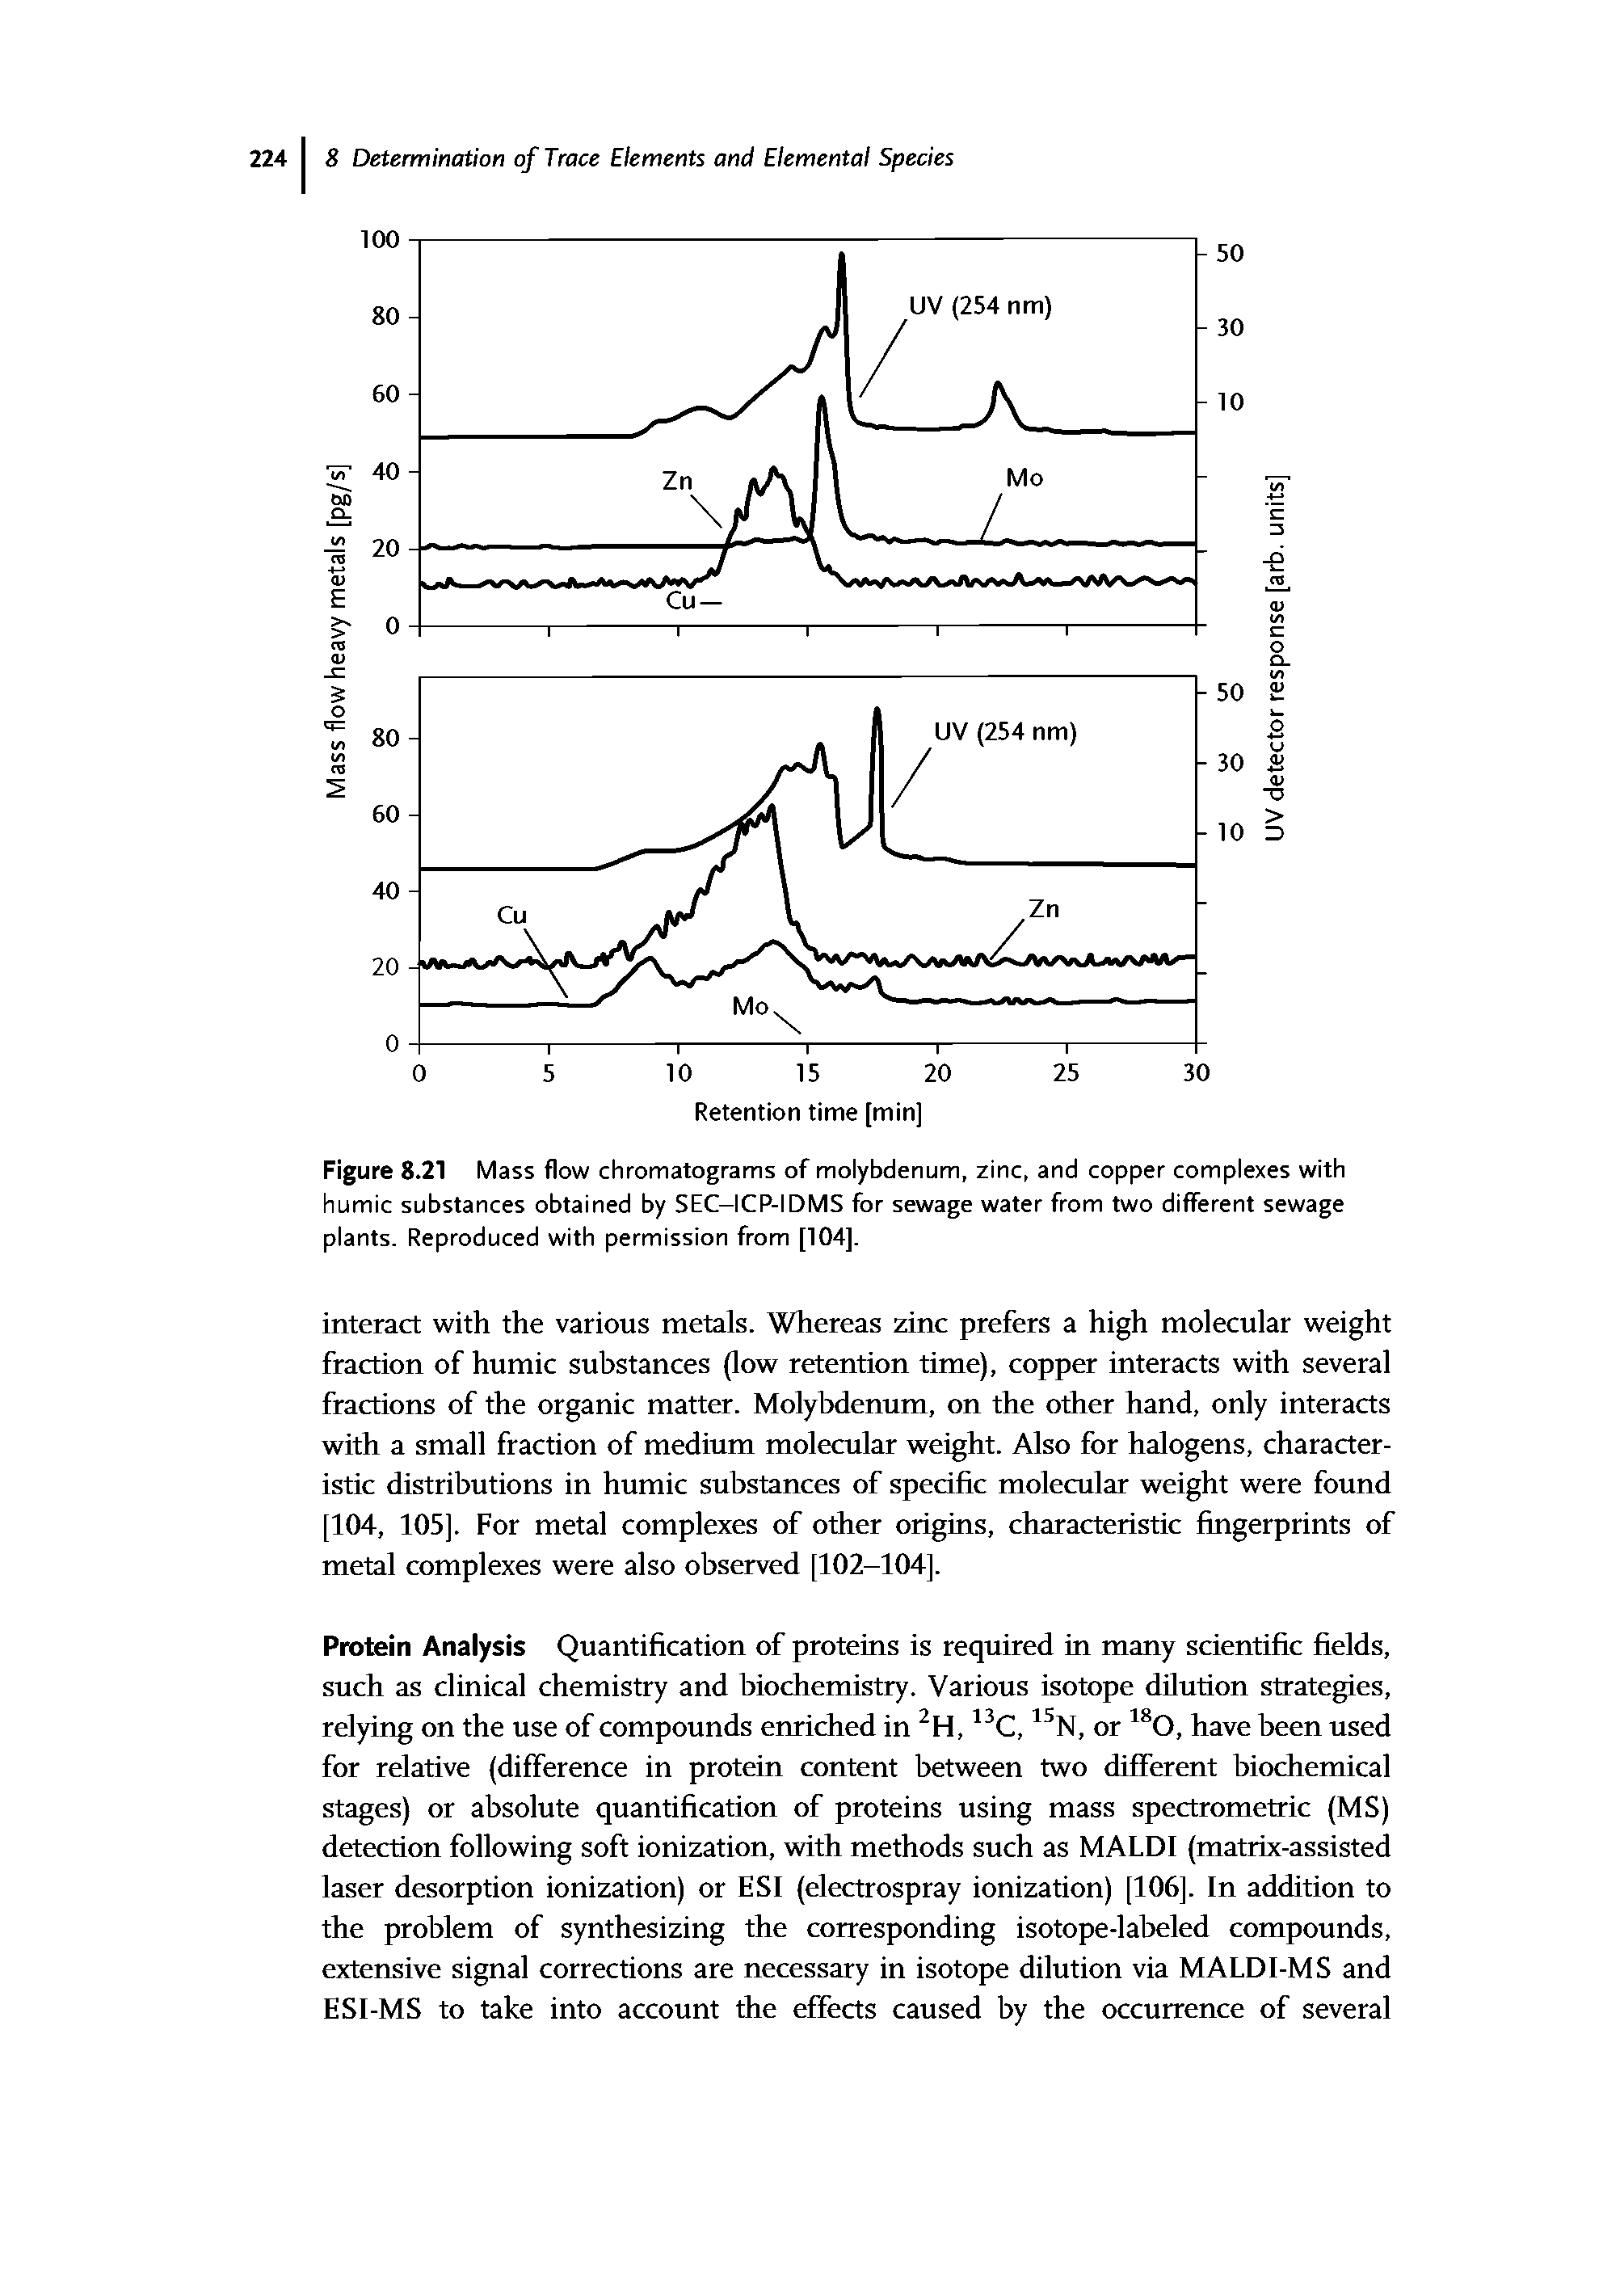 Figure 8.21 Mass flow chromatograms of molybdenum, zinc, and copper complexes with humic substances obtained by SEC-ICP-IDMS for sewage water from two different sewage plants. Reproduced with permission from [104].